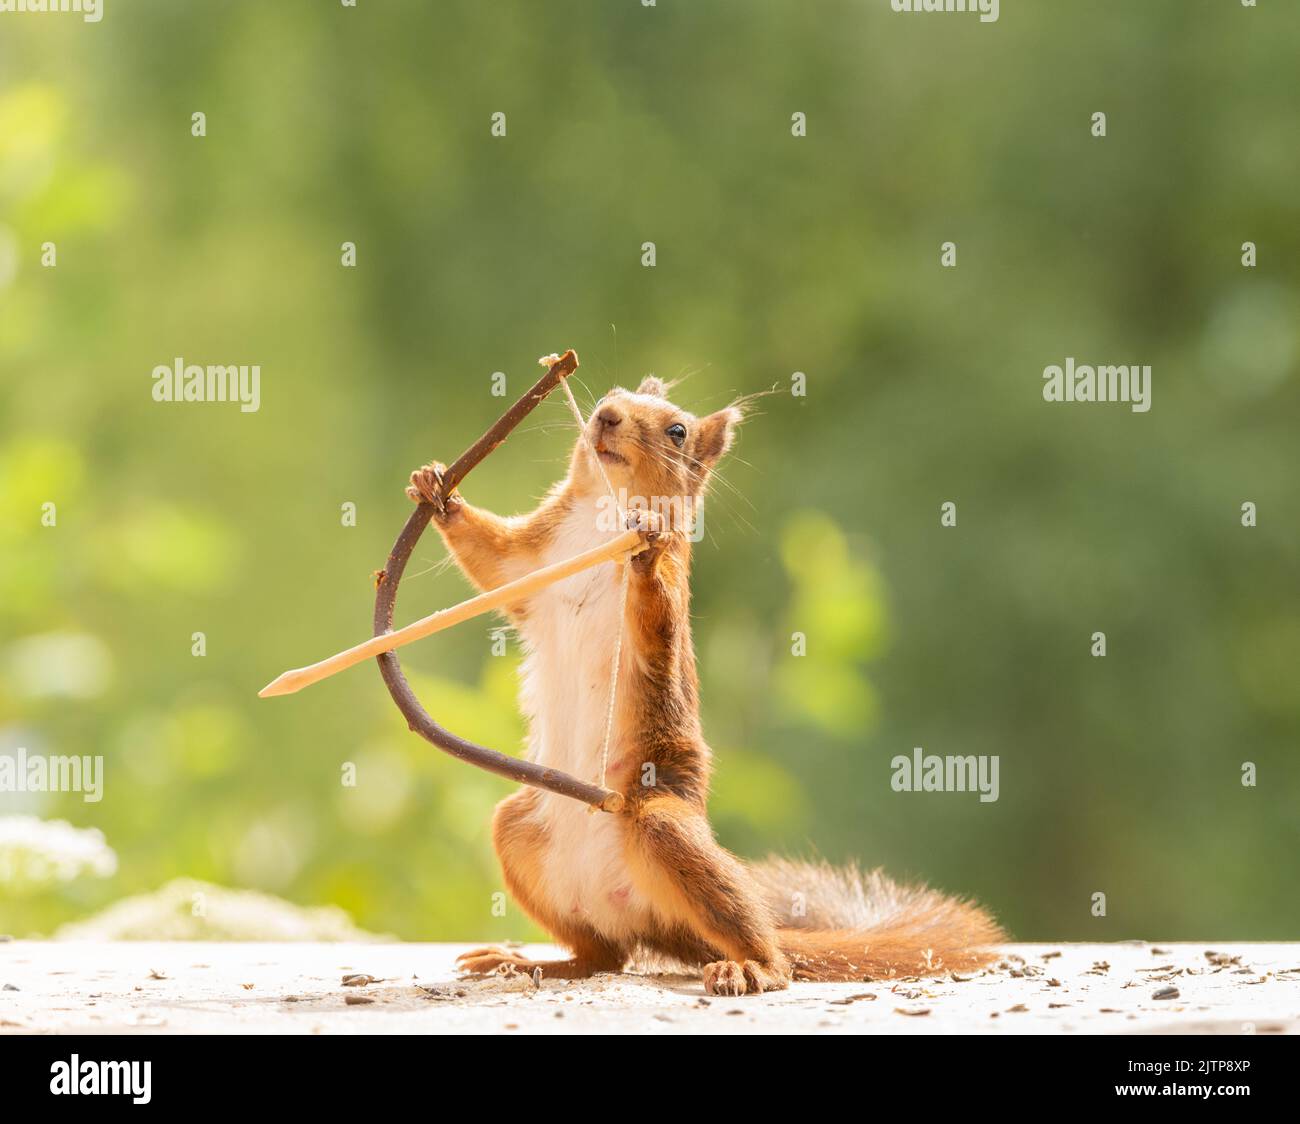 red squirrel standing with an bow and arrow Stock Photo